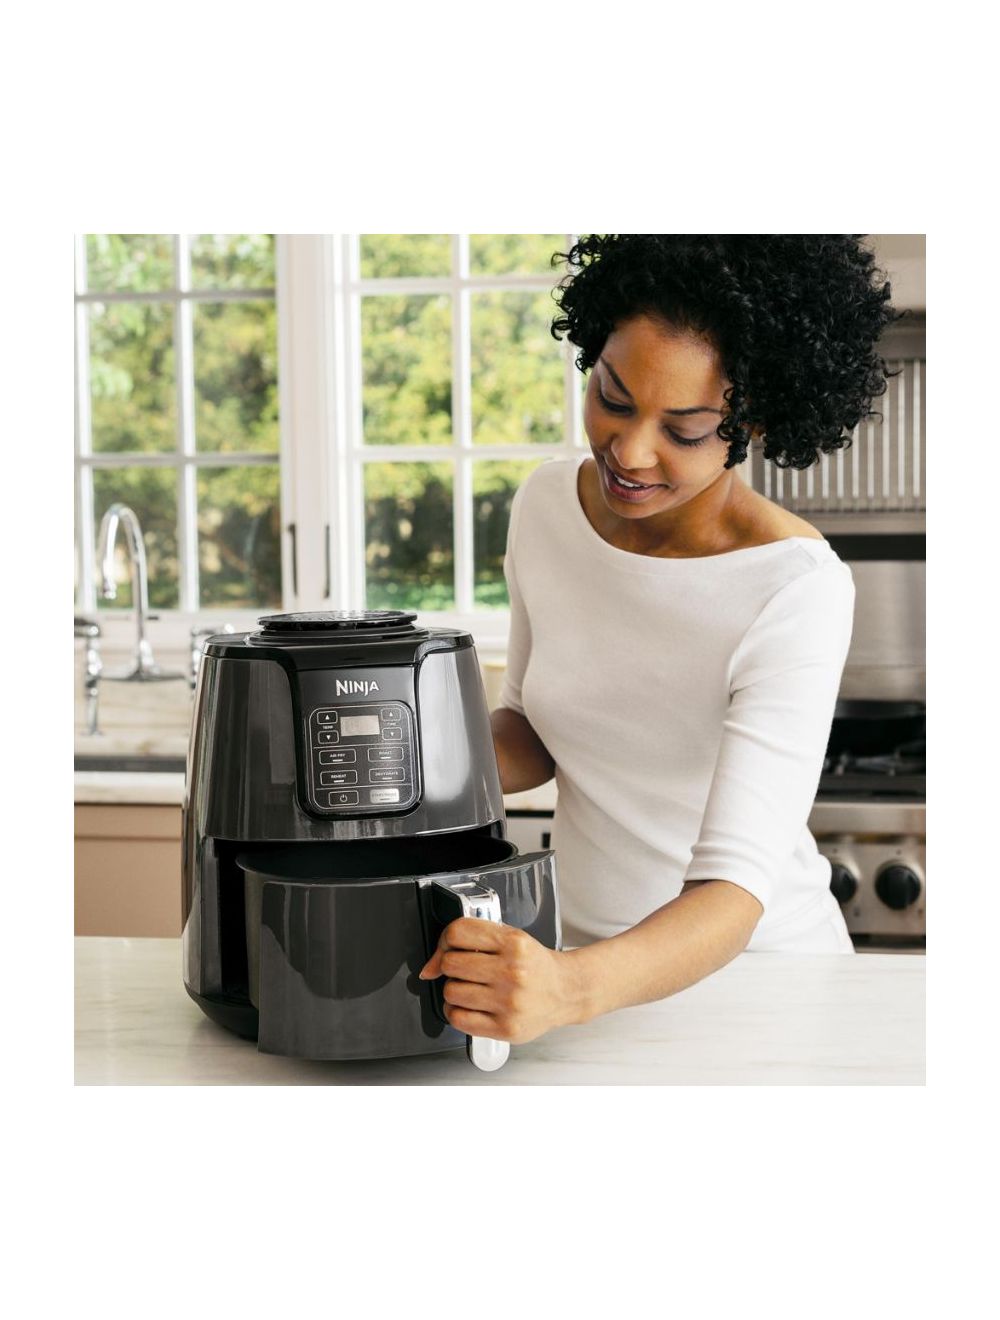 Ninja Air Fryer | Capacity 3.8L | Color Black and Grey | Best Kitchen Appliances in Bahrain | Halabh